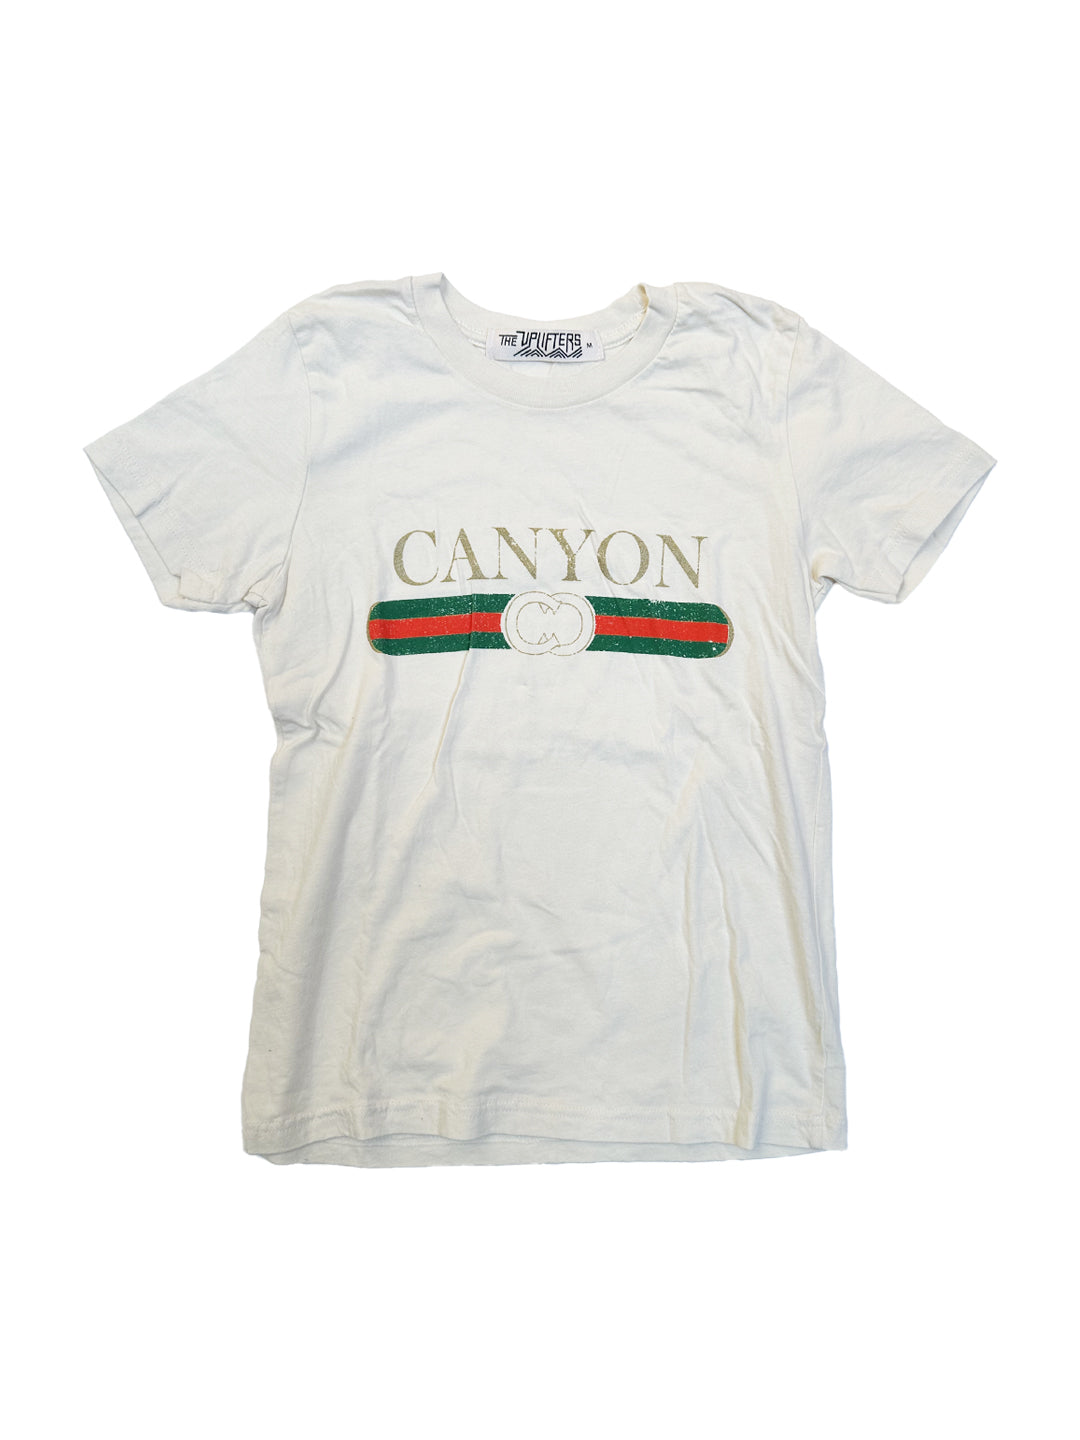 Canyon Stripe Tee Youth in Ivory